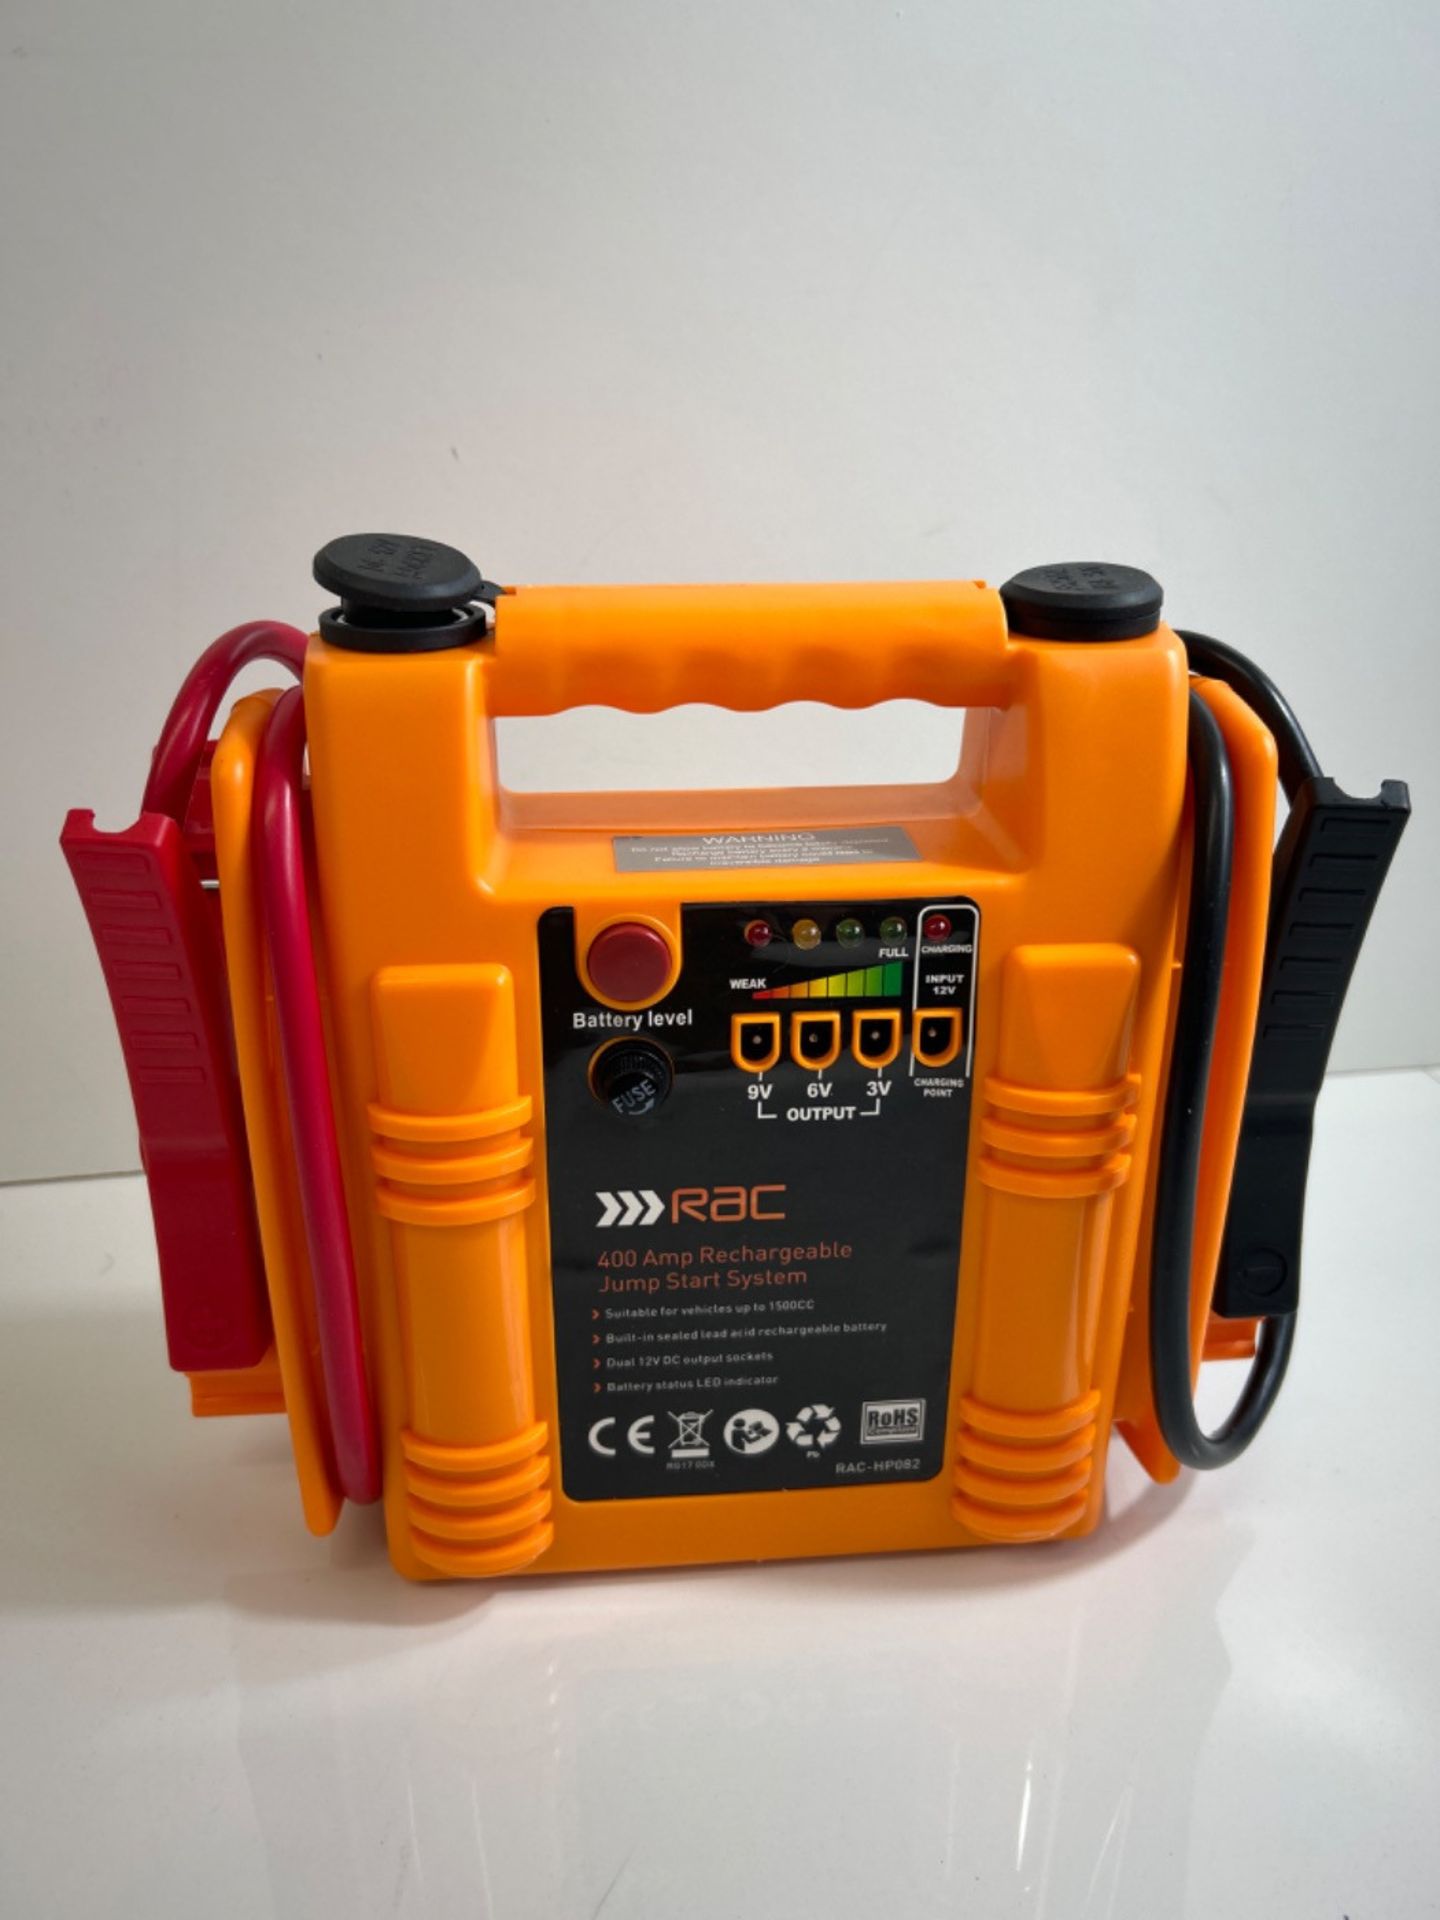 RAC 400 Amp Rechargeable Jump Start System HP082 - For Car Batteries Up To 1500CC, Orange/Red,Des... - Image 2 of 3